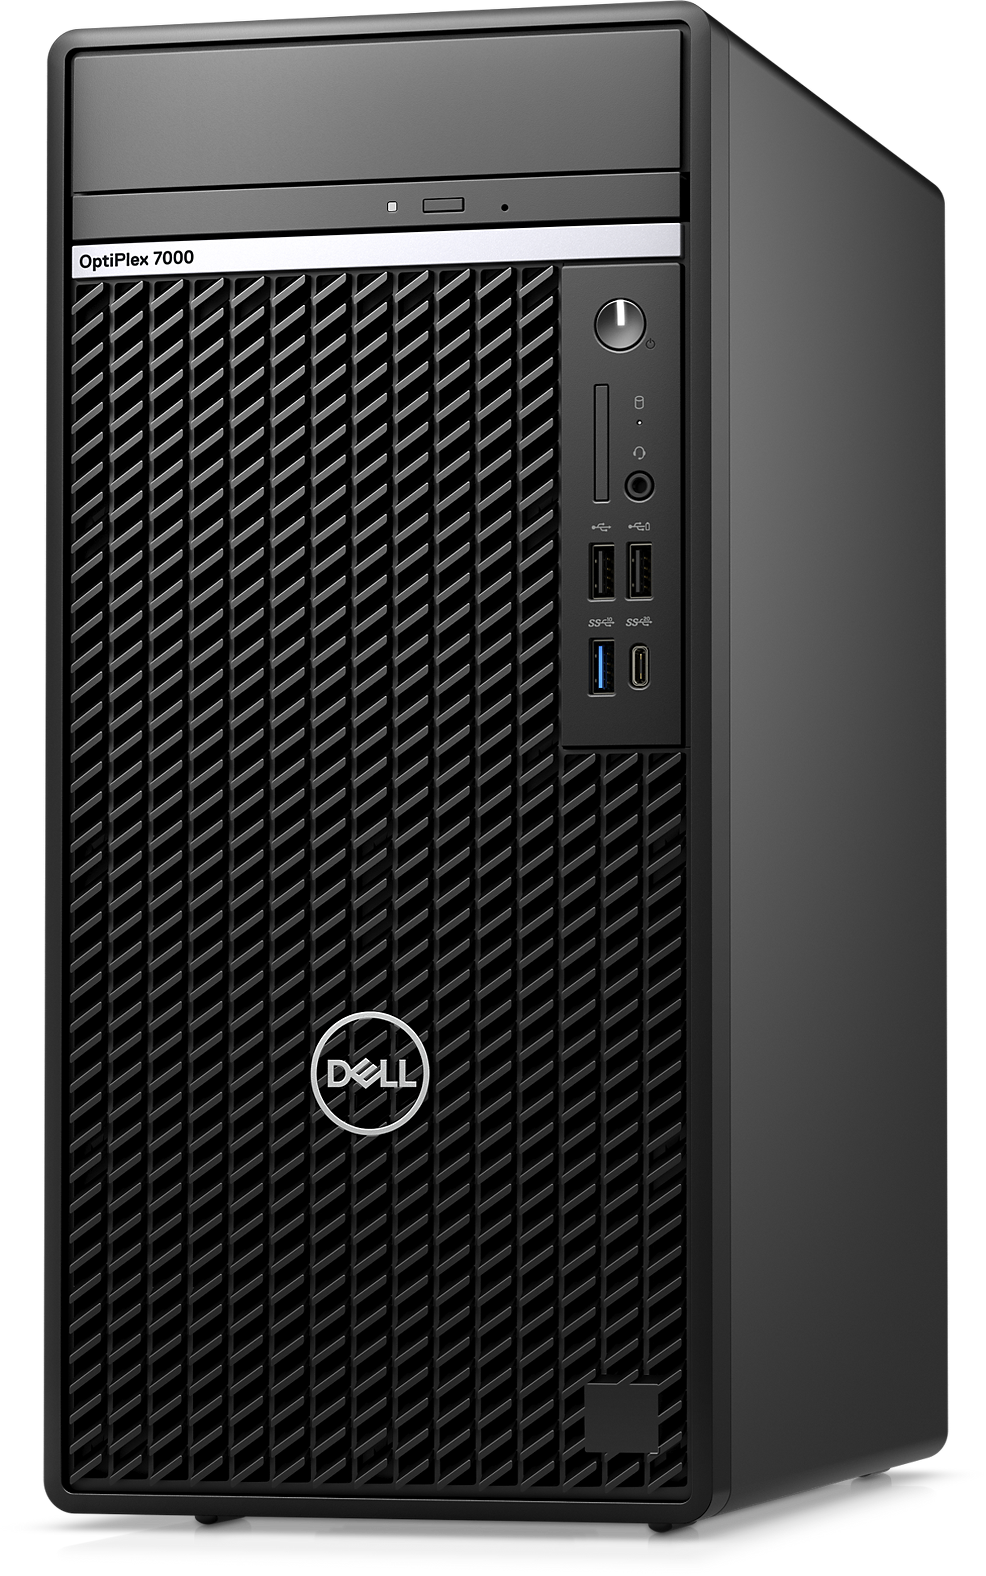 https://i.dell.com/is/image/DellContent/content/dam/ss2/products/desktops-and-all-in-ones/optiplex/7000-tsff/media-gallery/optiplex-7000t-gallery-3.psd?wid=1920&hei=1576&fmt=png-alpha&qlt=90%2c0&op_usm=1.75%2c0.3%2c2%2c0&resMode=sharp&pscan=auto&fit=constrain%2c1&align=0%2c0